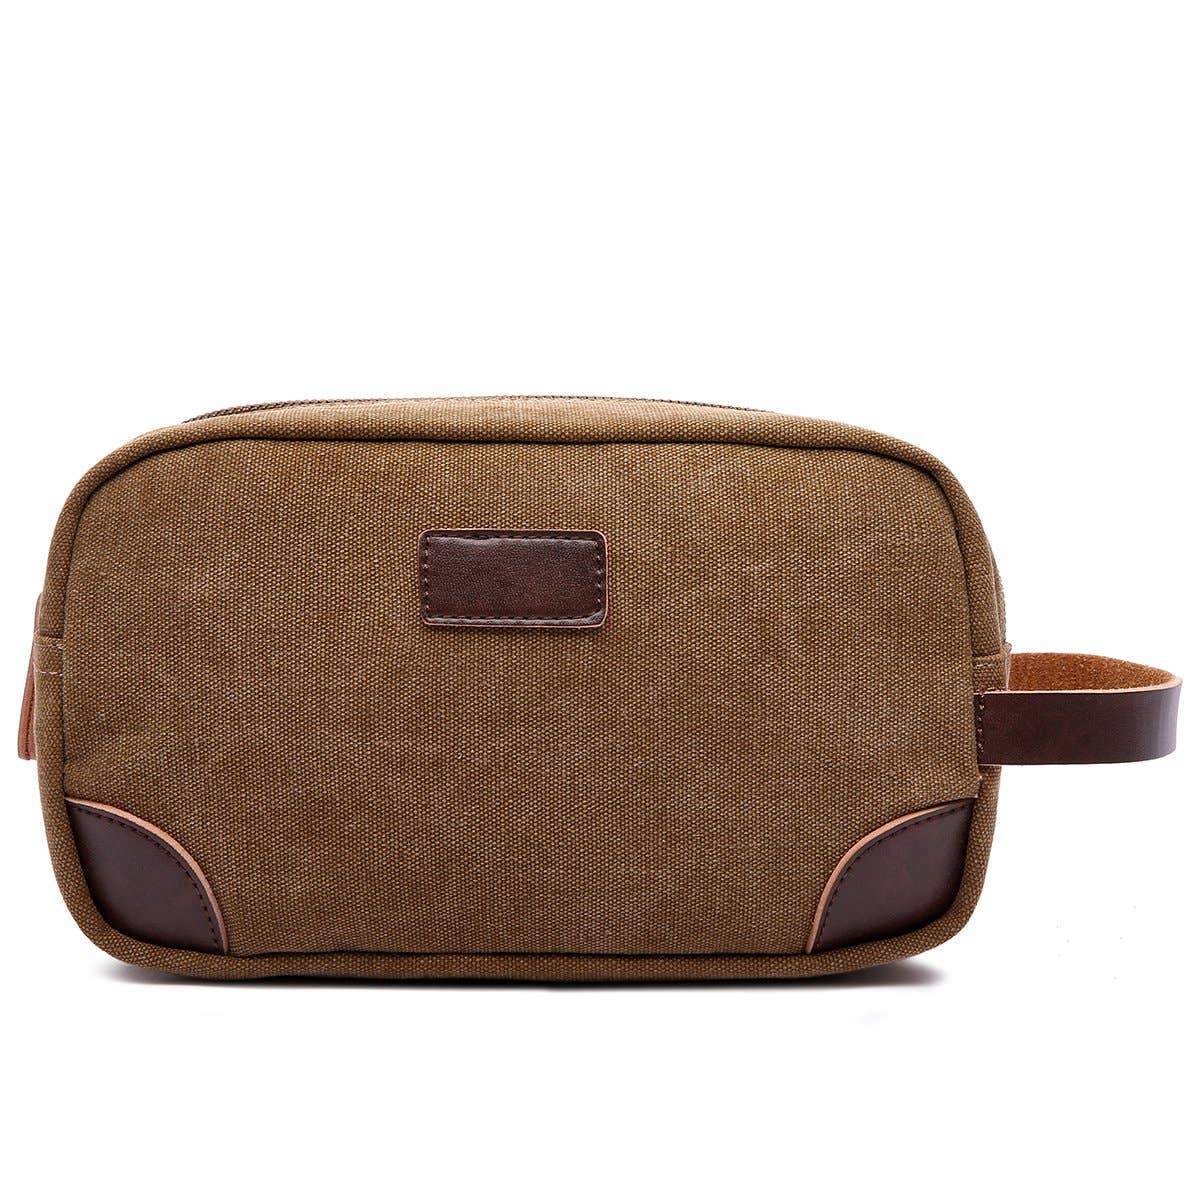 Mad Men Canvas and Leather Dopp Kit